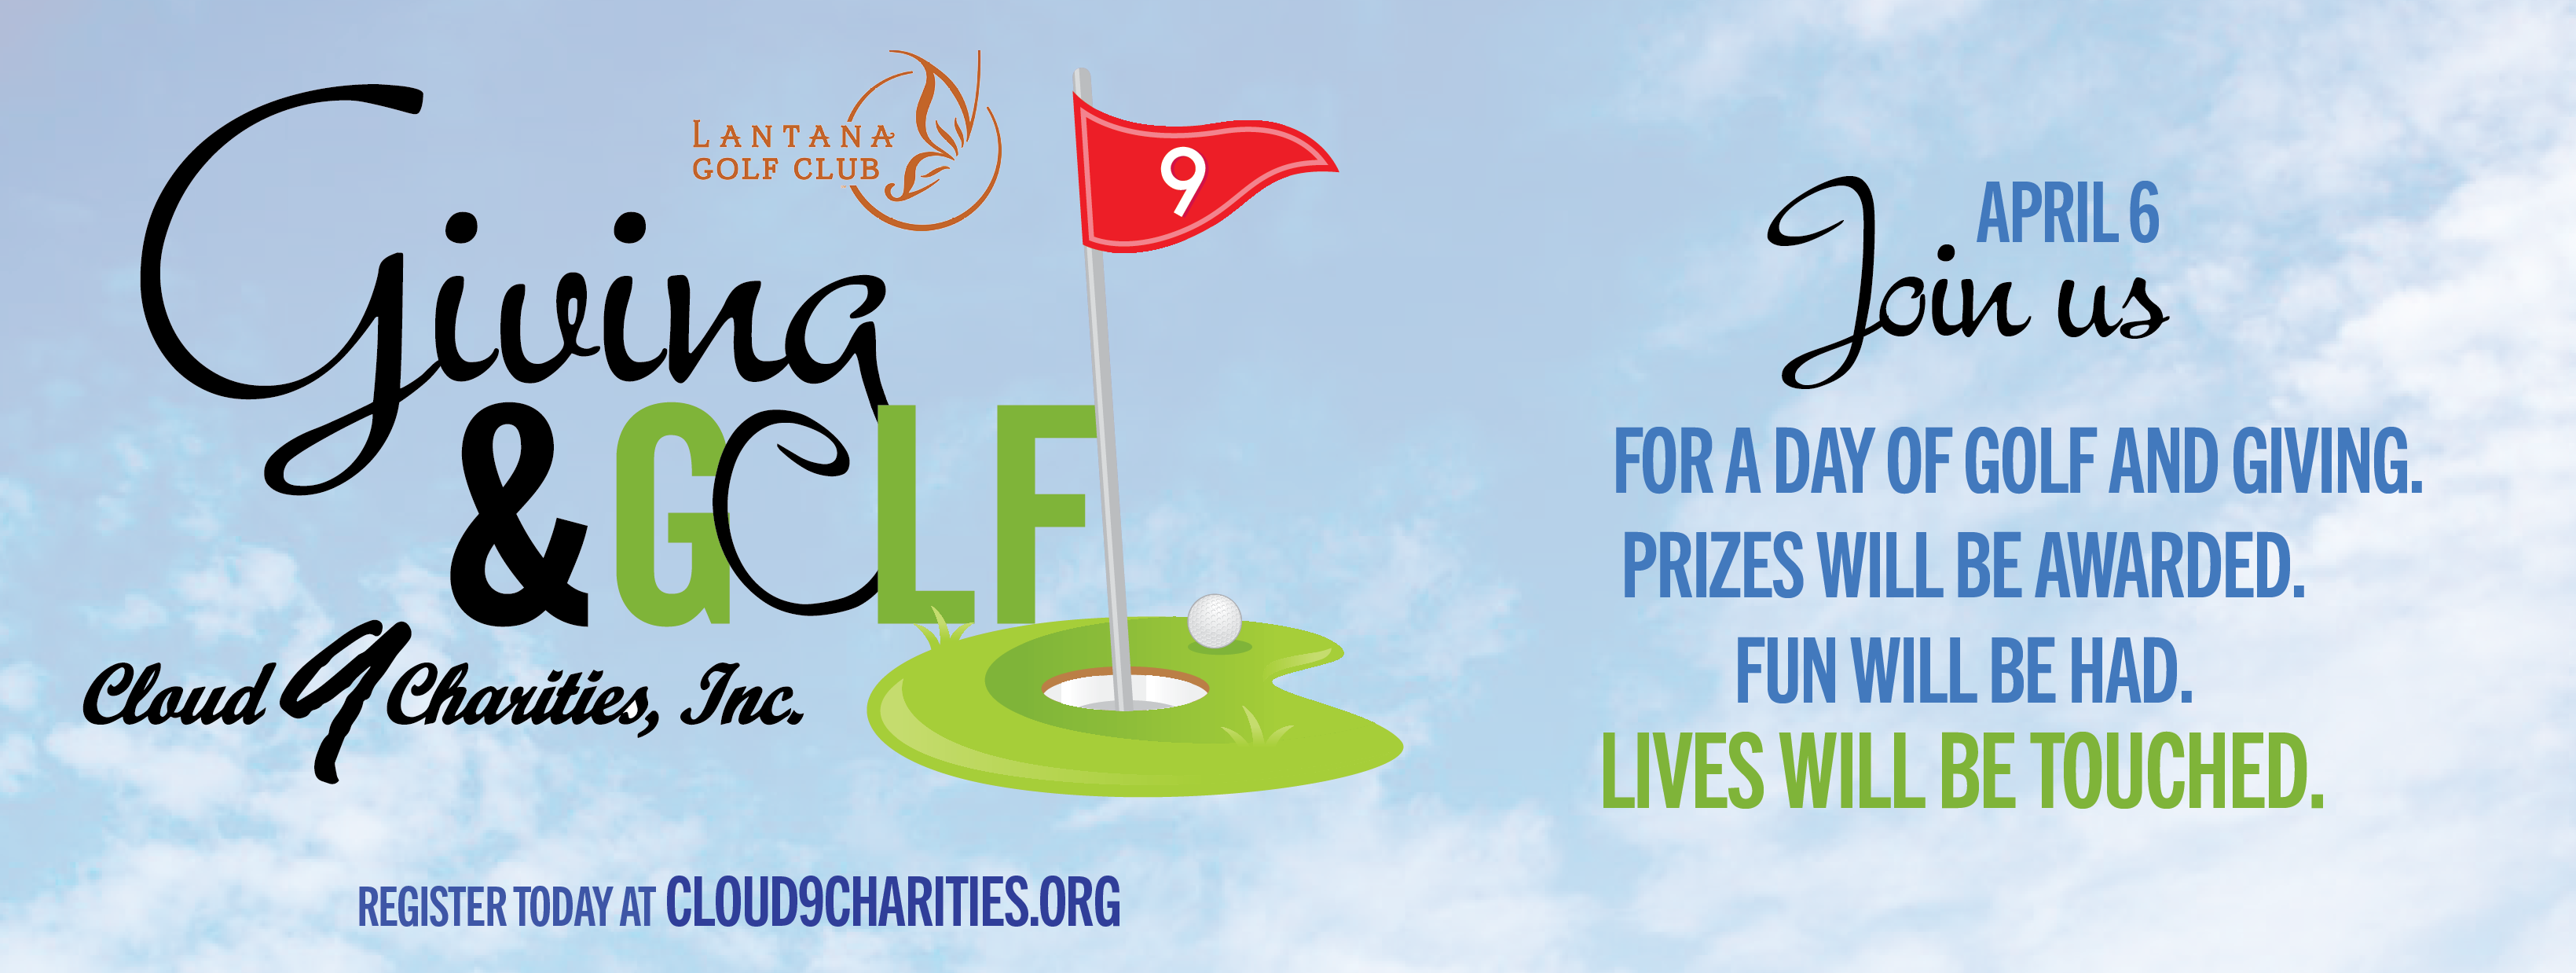 Cloud 9 Charities Giving and Golf 2020